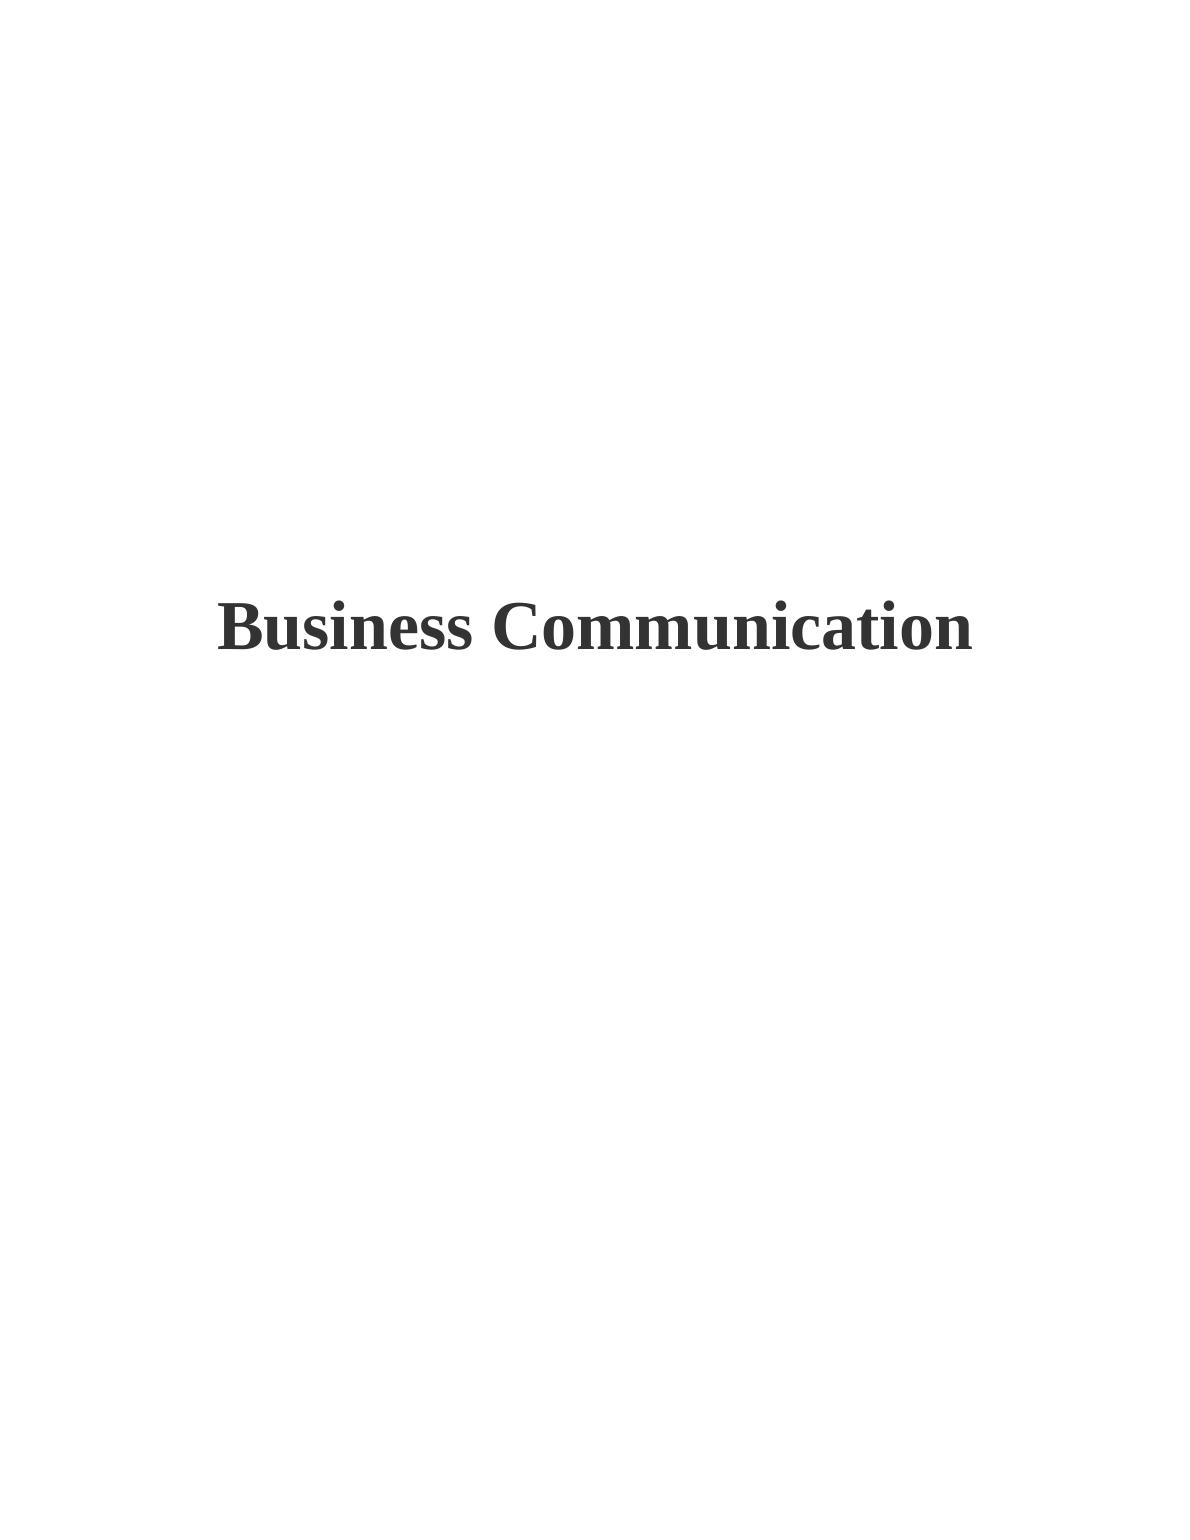 Business Communication: Marketing, Advertising, and Public Relation_1